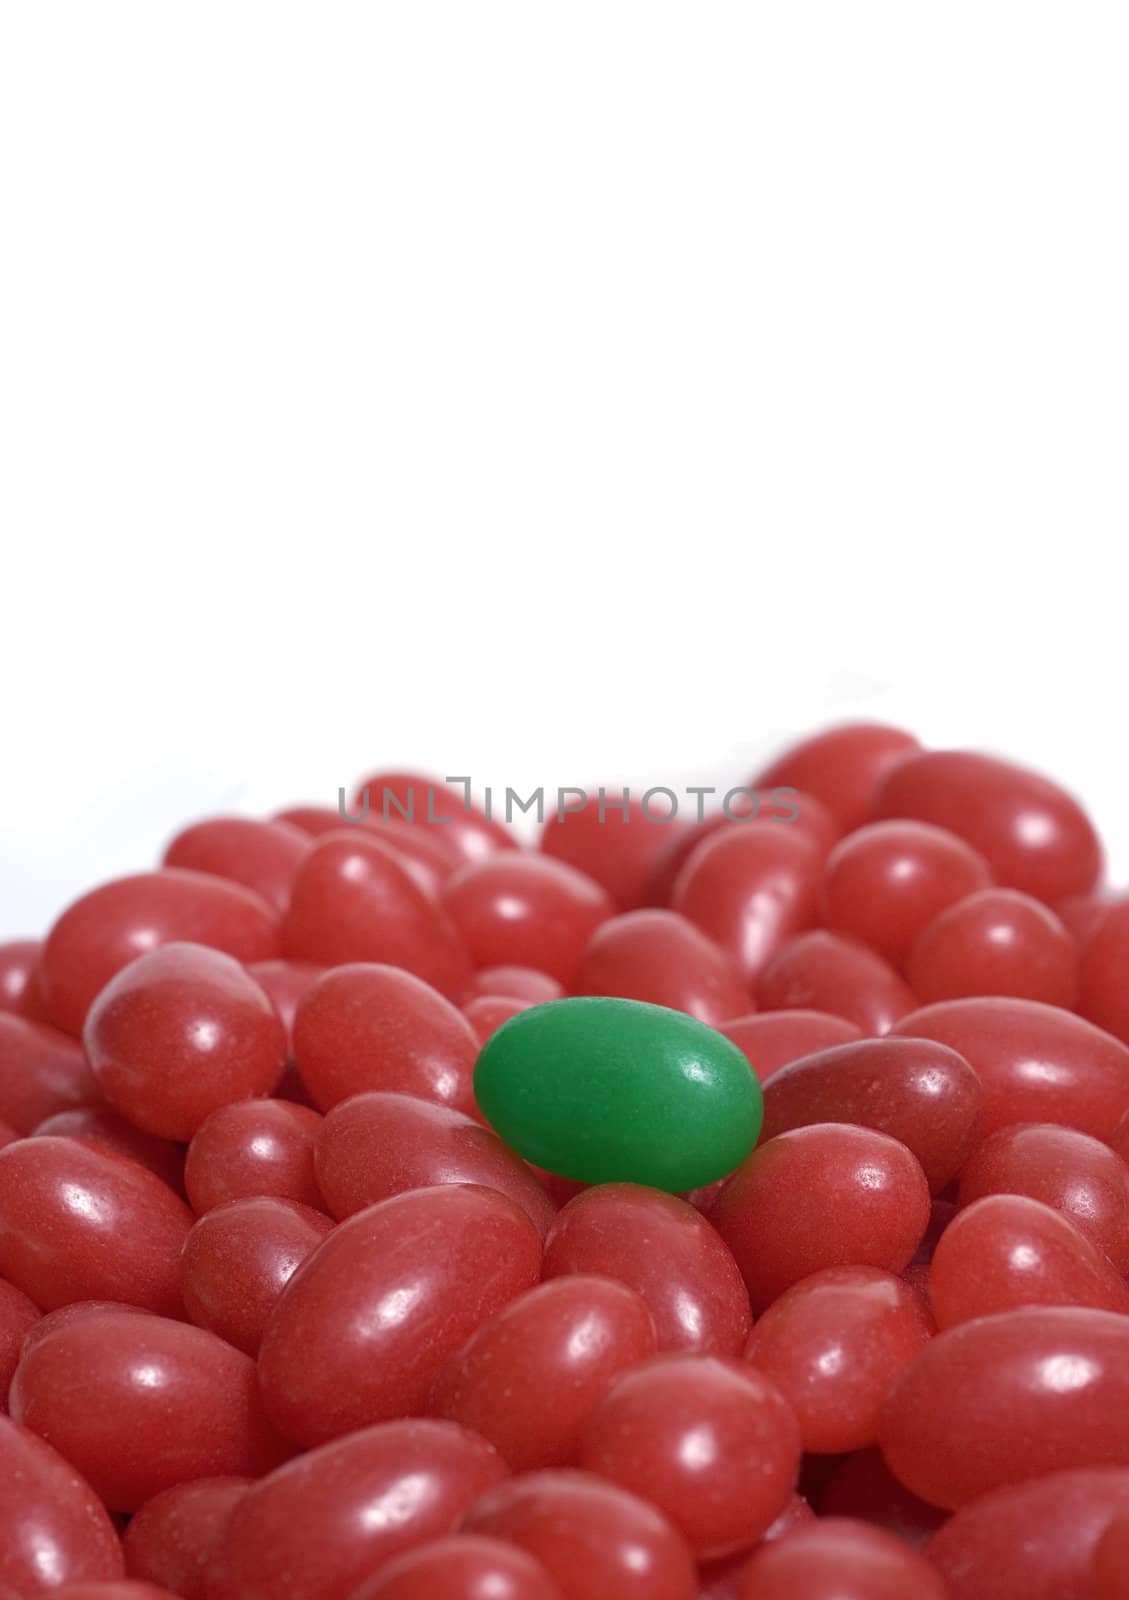 Green jelly bean with many red jelly beans